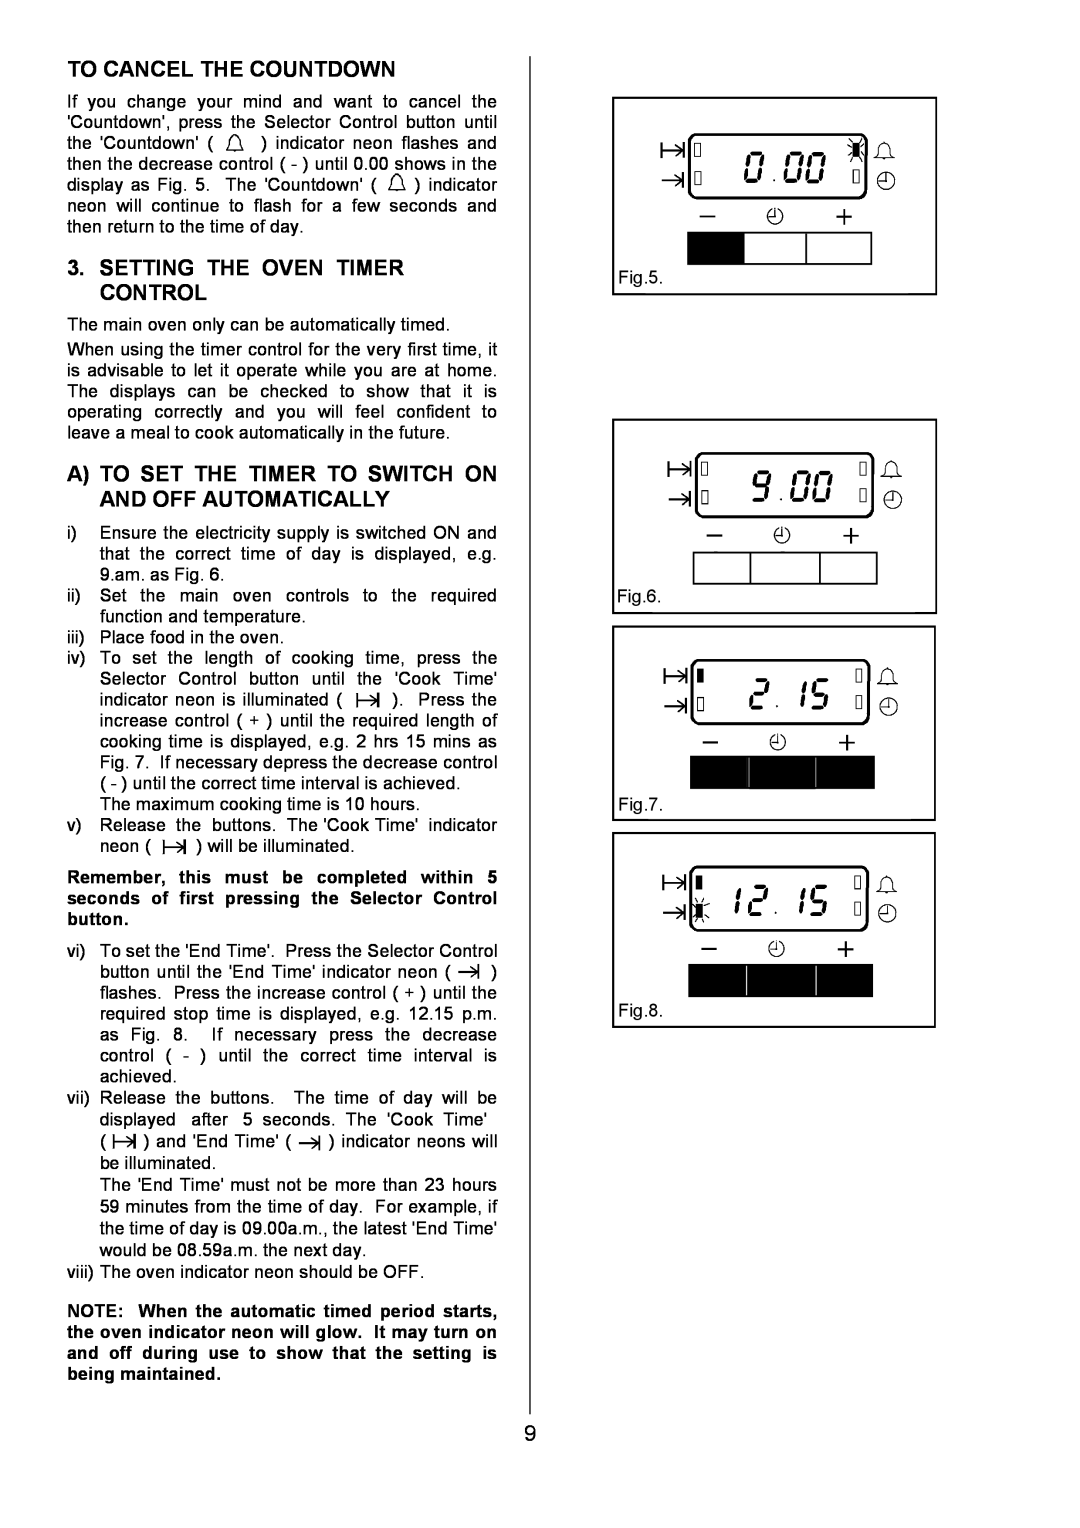 Electrolux D4101-4 operating instructions To Cancel The Countdown, Setting The Oven Timer Control 